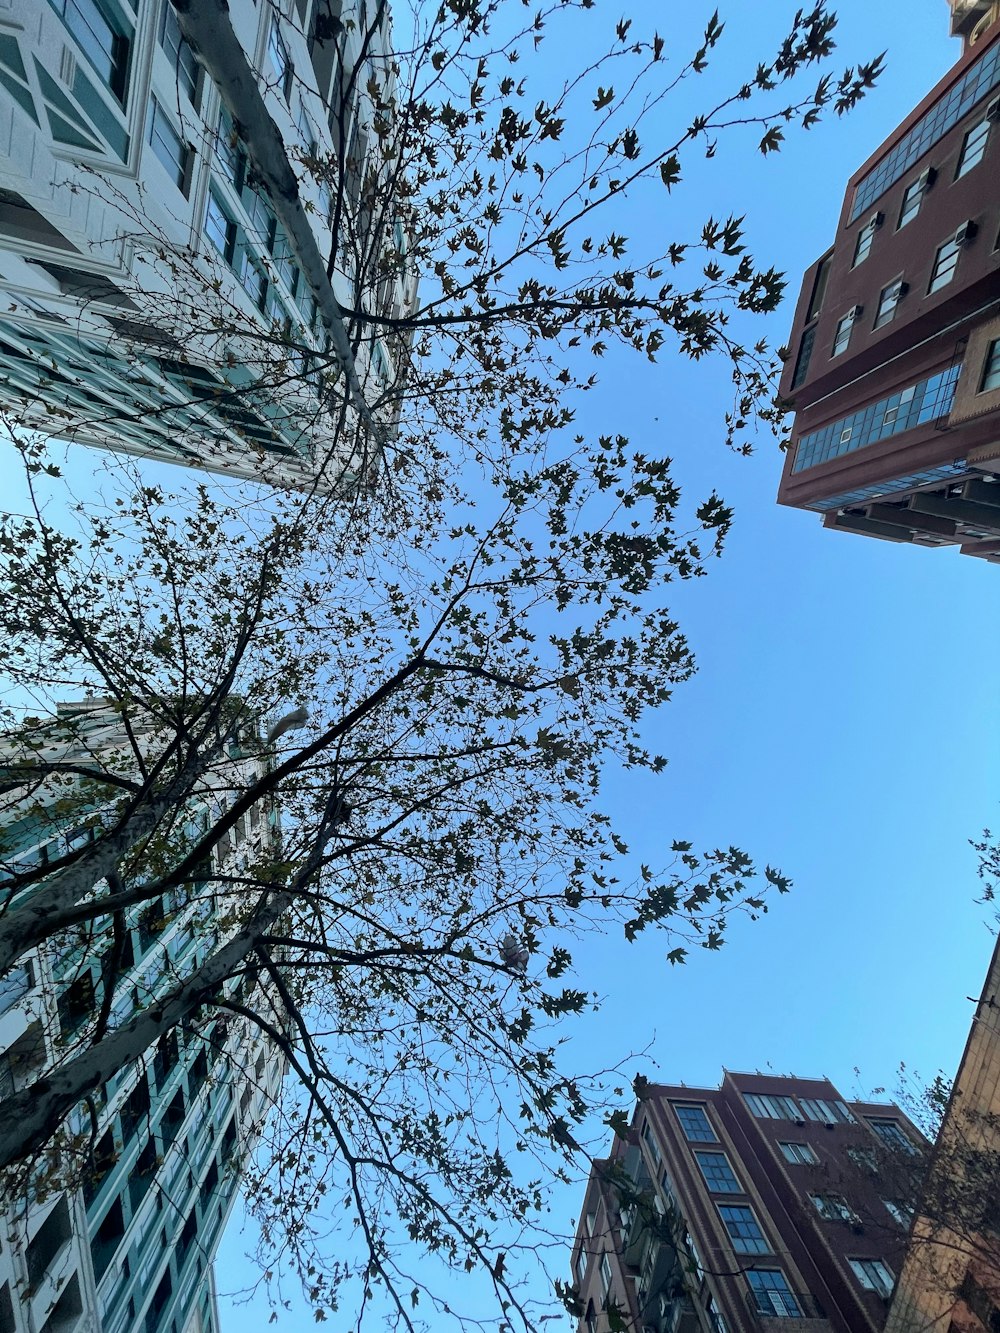 looking up at tall buildings and a tree in the foreground